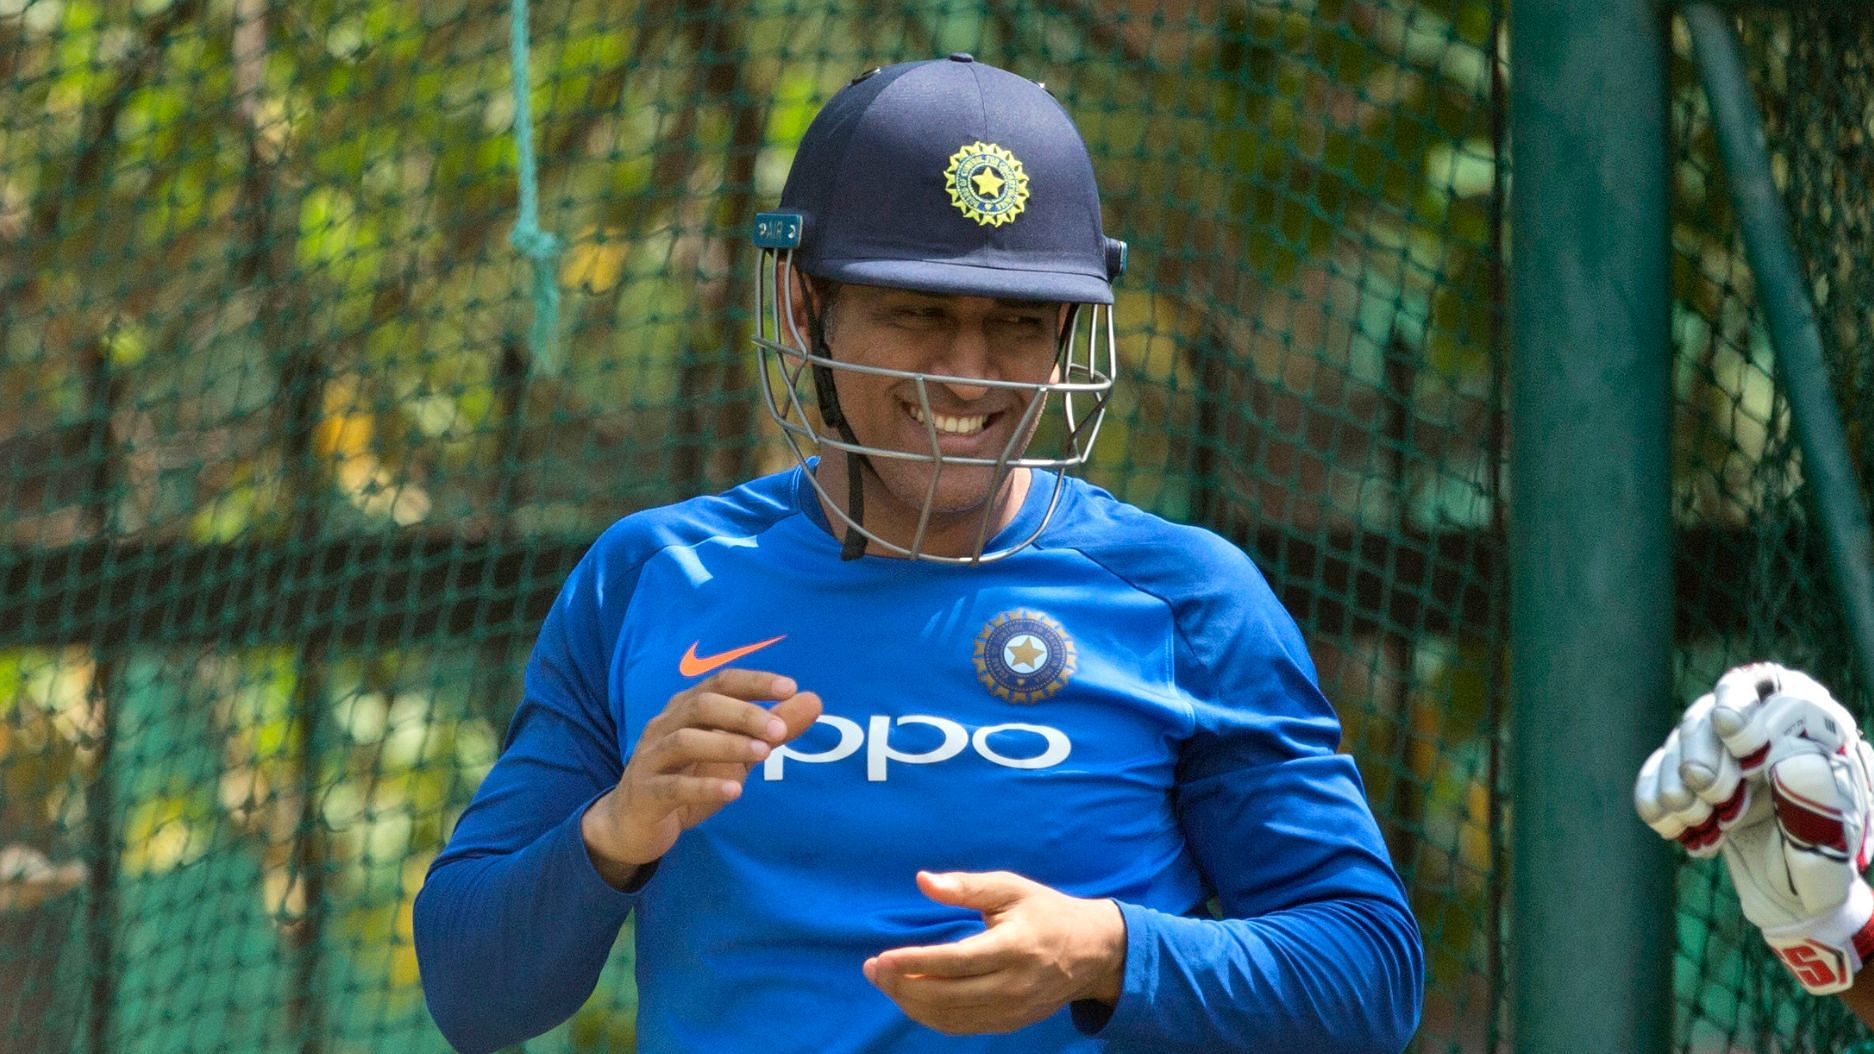 The Board of Control for Cricket in India (BCCI) is willing to host a farewell match for former India captain MS Dhoni.